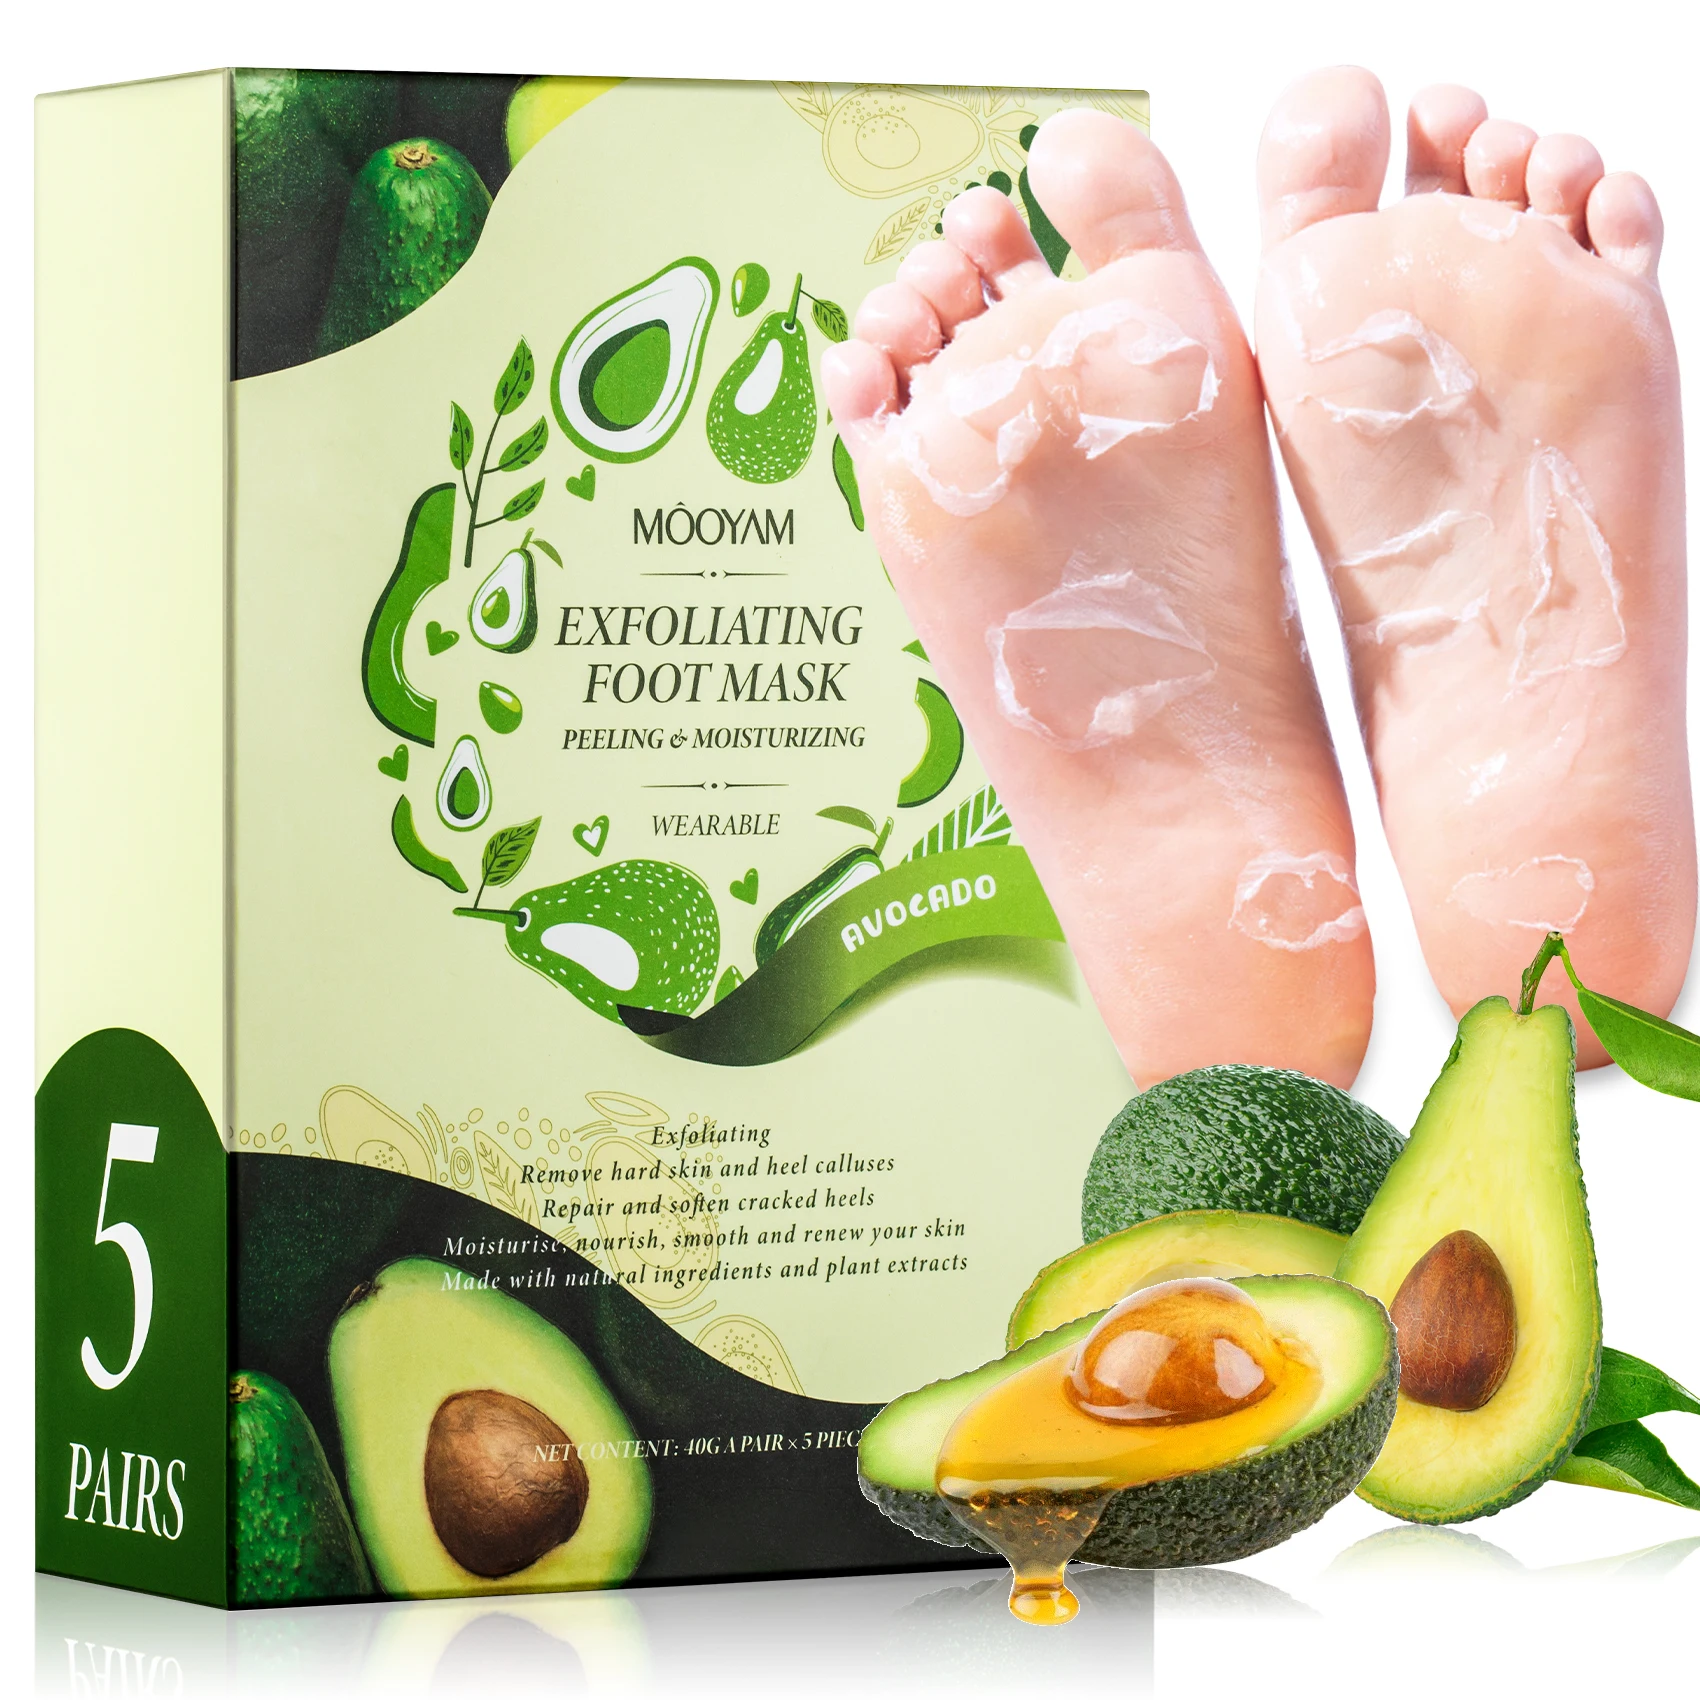 Natural Strength Dry Skin Remover Soft Feet Sheet Exfoliation Foot Mask -  China Exfoliation Foot Mask and Foot Mask price